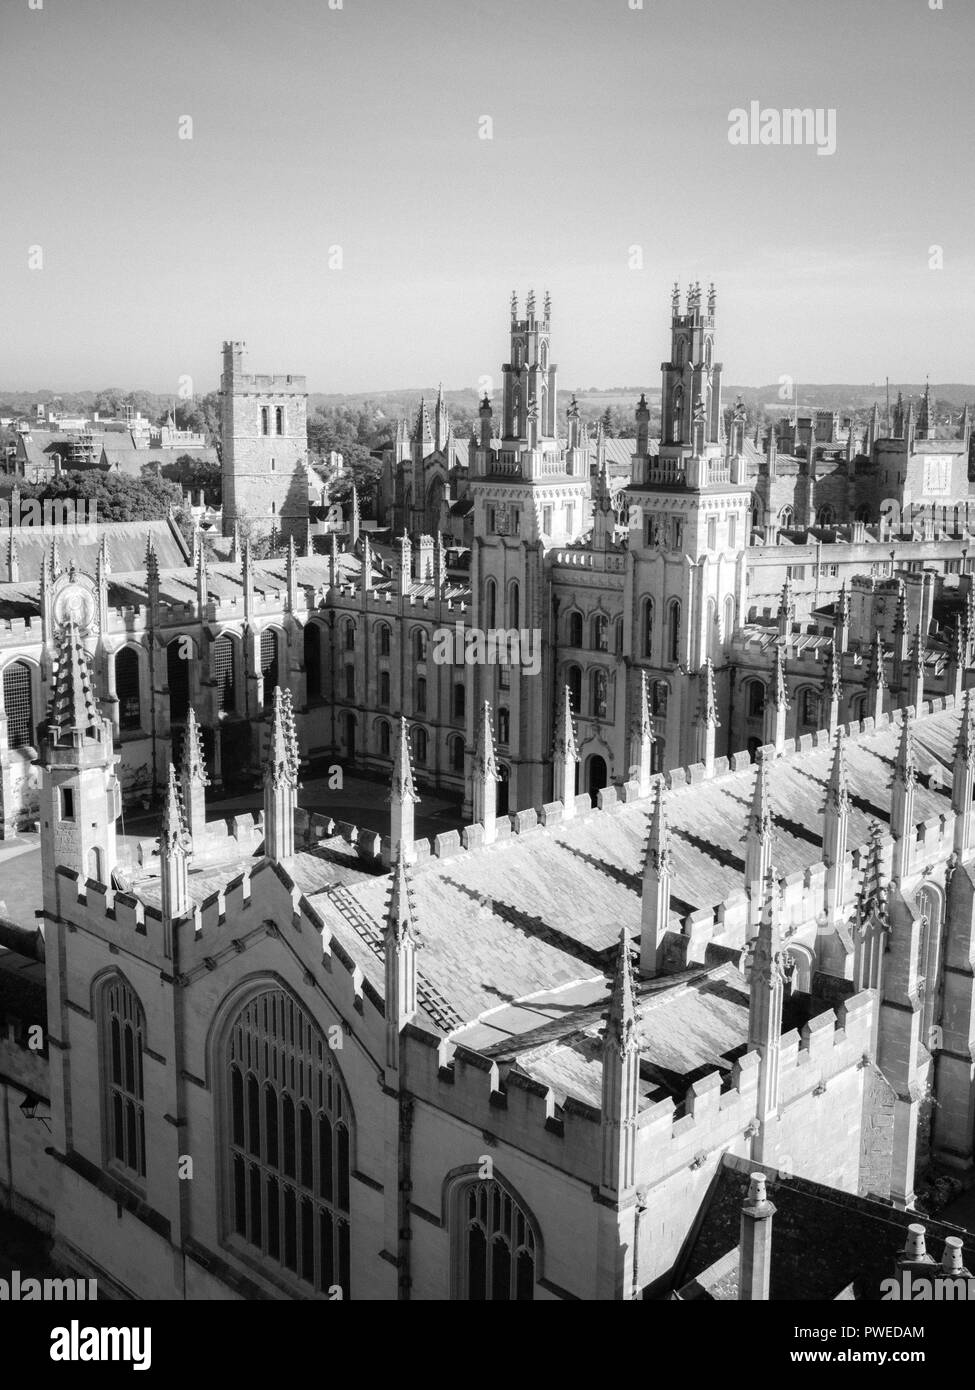 View of Historic, All Souls College, Oxford University, Oxford, England, UK, GB. Stock Photo